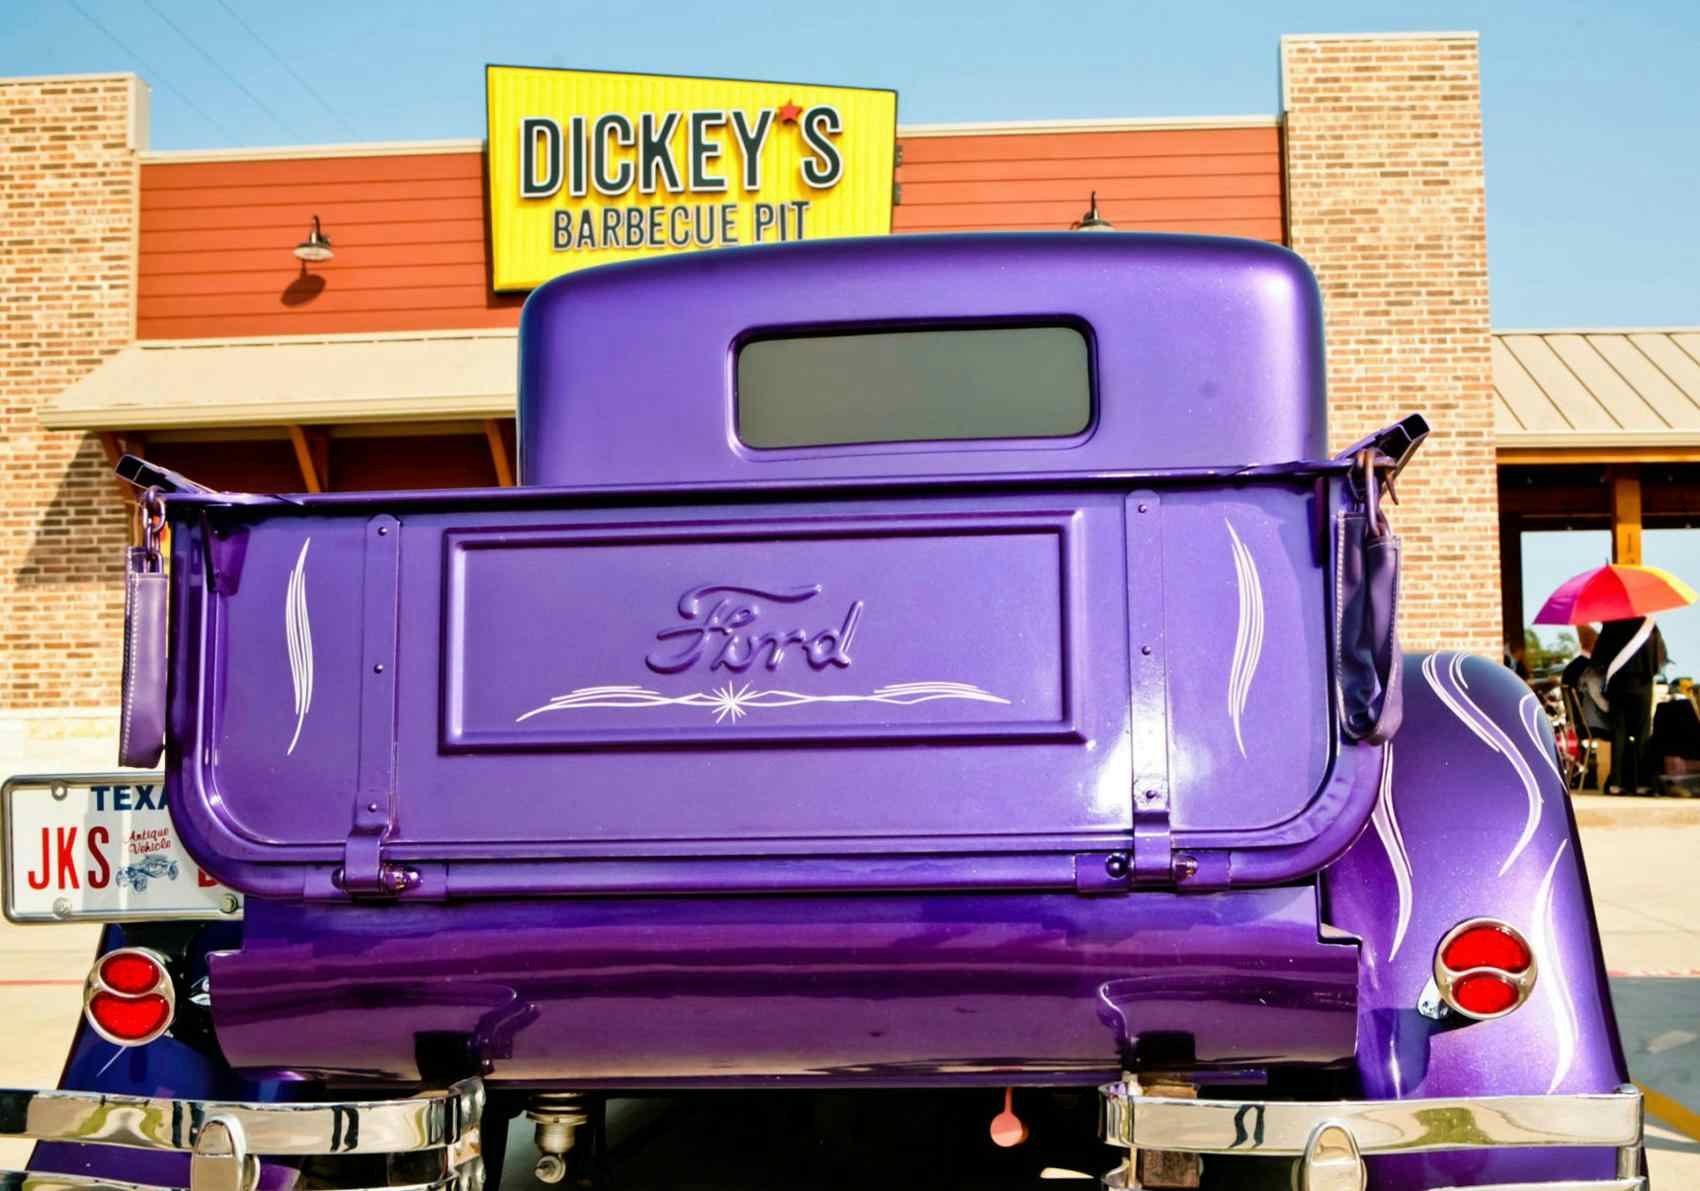 Markets Insider:  Free Delivery Through March at Dickey’s Barbecue Pit